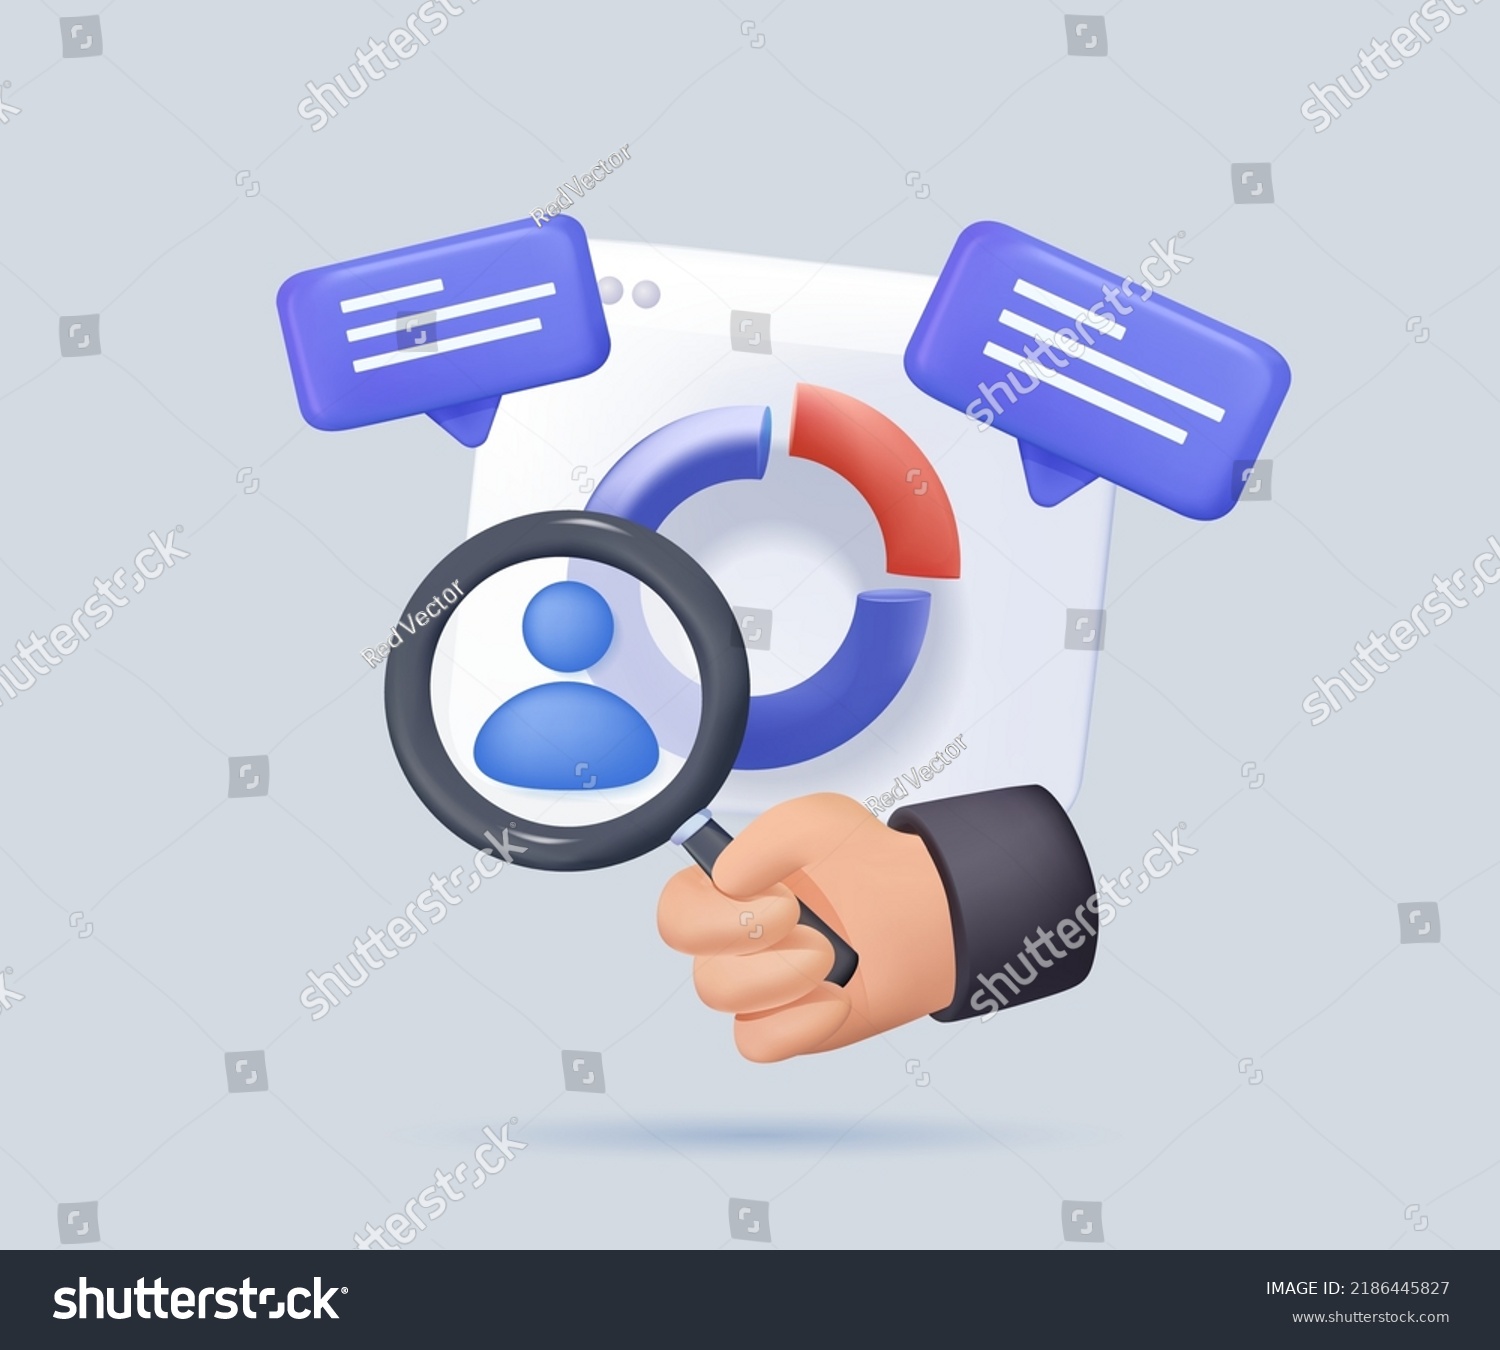 SVG of 3D render Marketing analitics and development illustration. Taking part in business activities. Magnifying glass, zoom, customer review. Know your customer. Business statistics graph. 3D Trendy vector svg